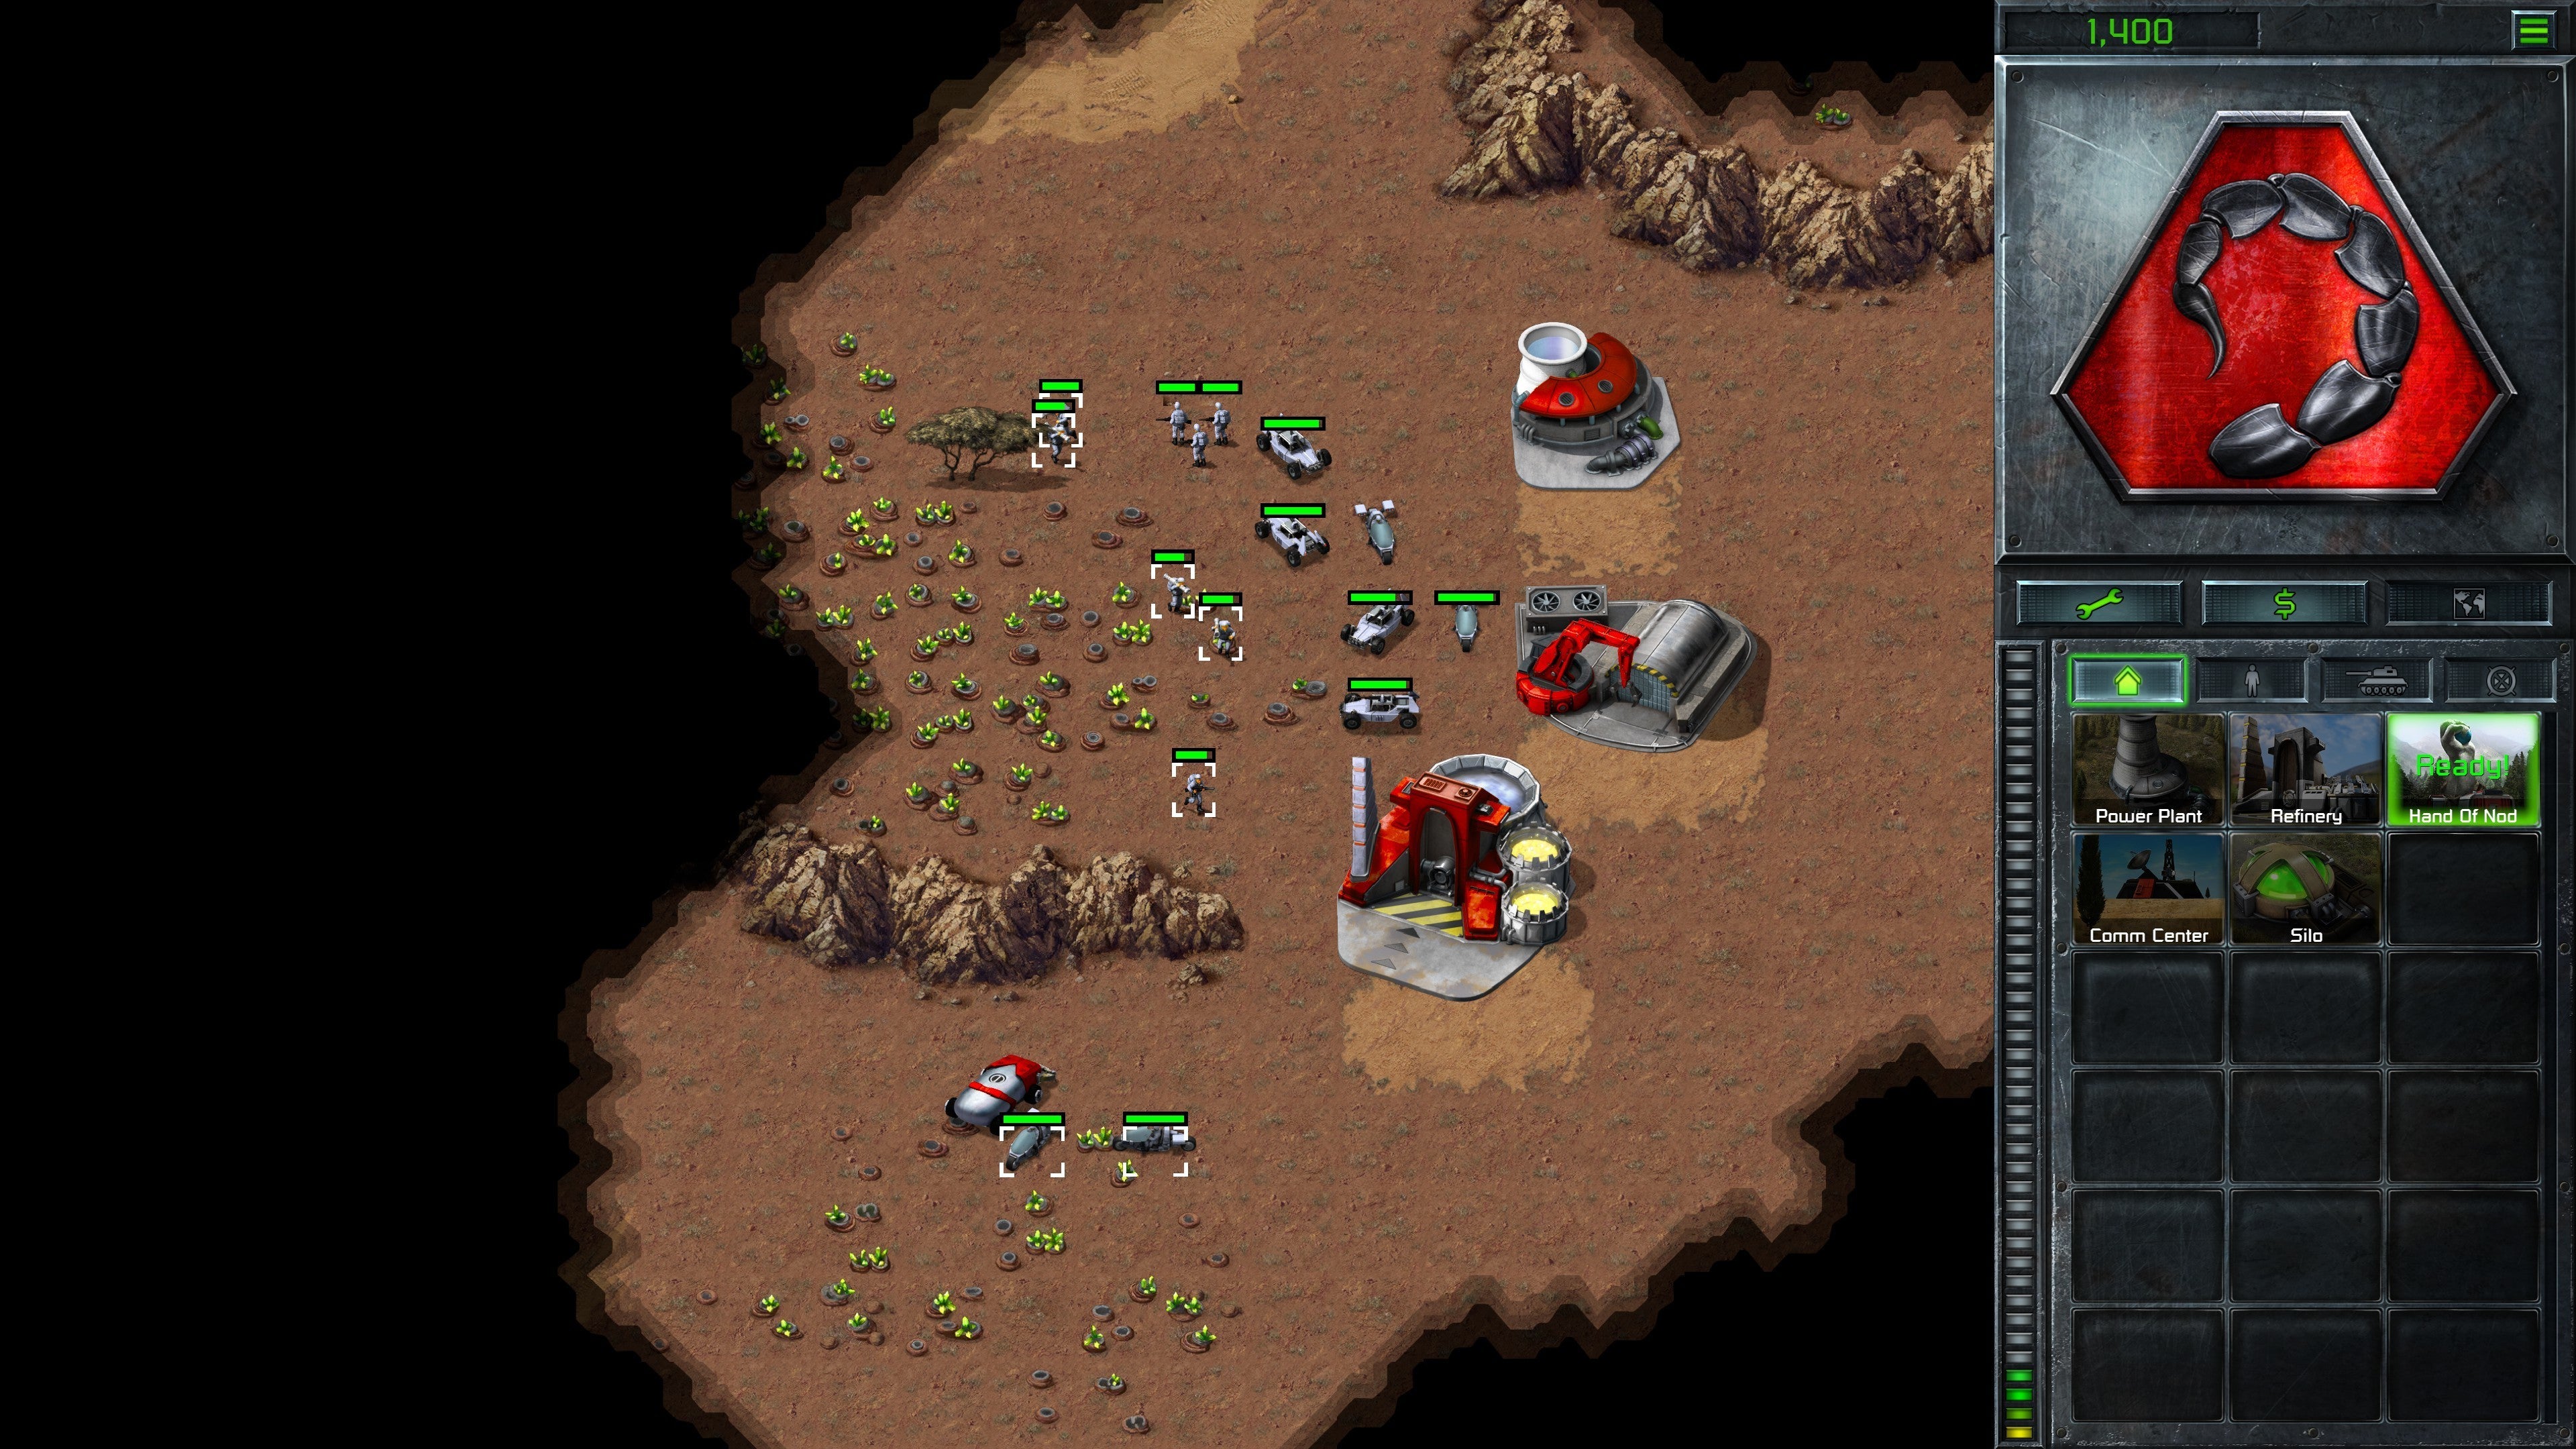 download command and conquer rivals